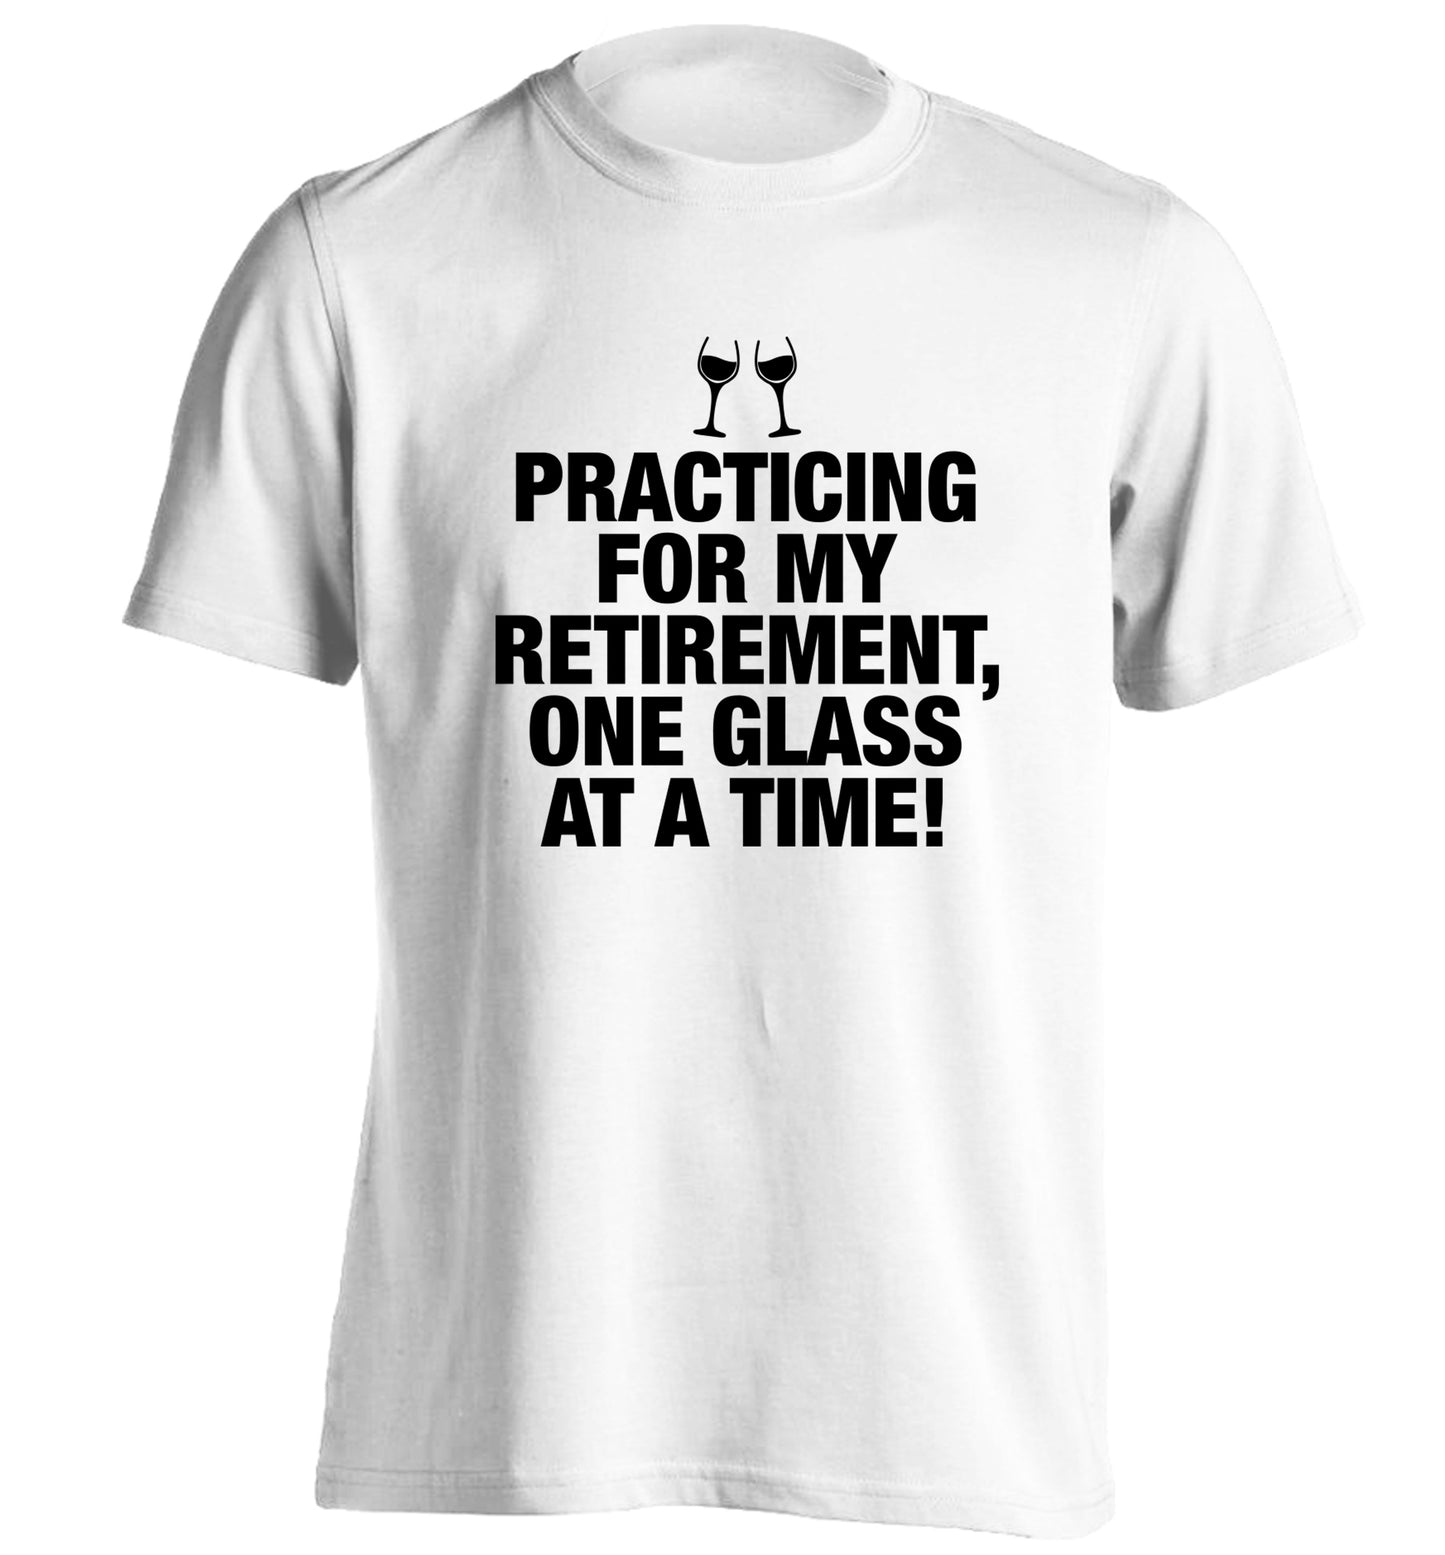 Practicing my retirement one glass at a time adults unisex white Tshirt 2XL